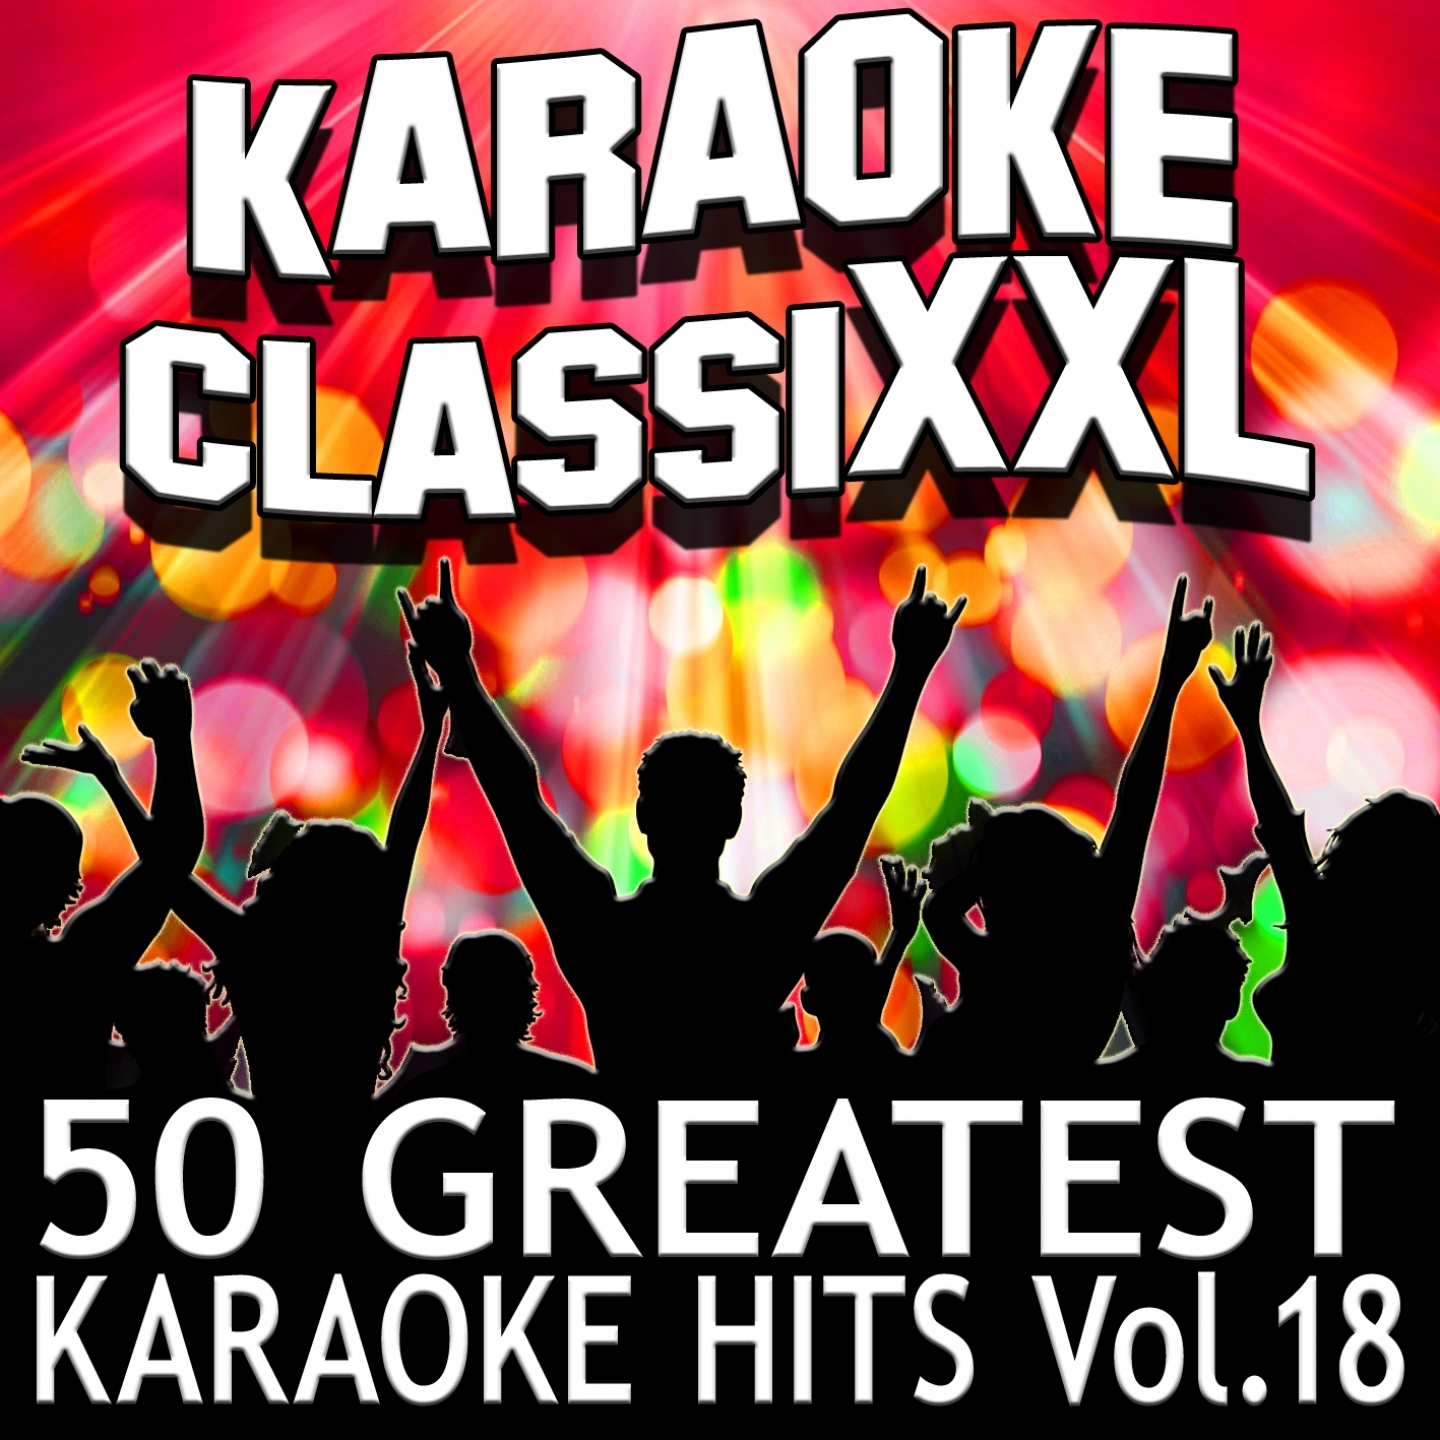 All the Things You Are (Karaoke Version) (Originally Performed By Frank Sinatra)